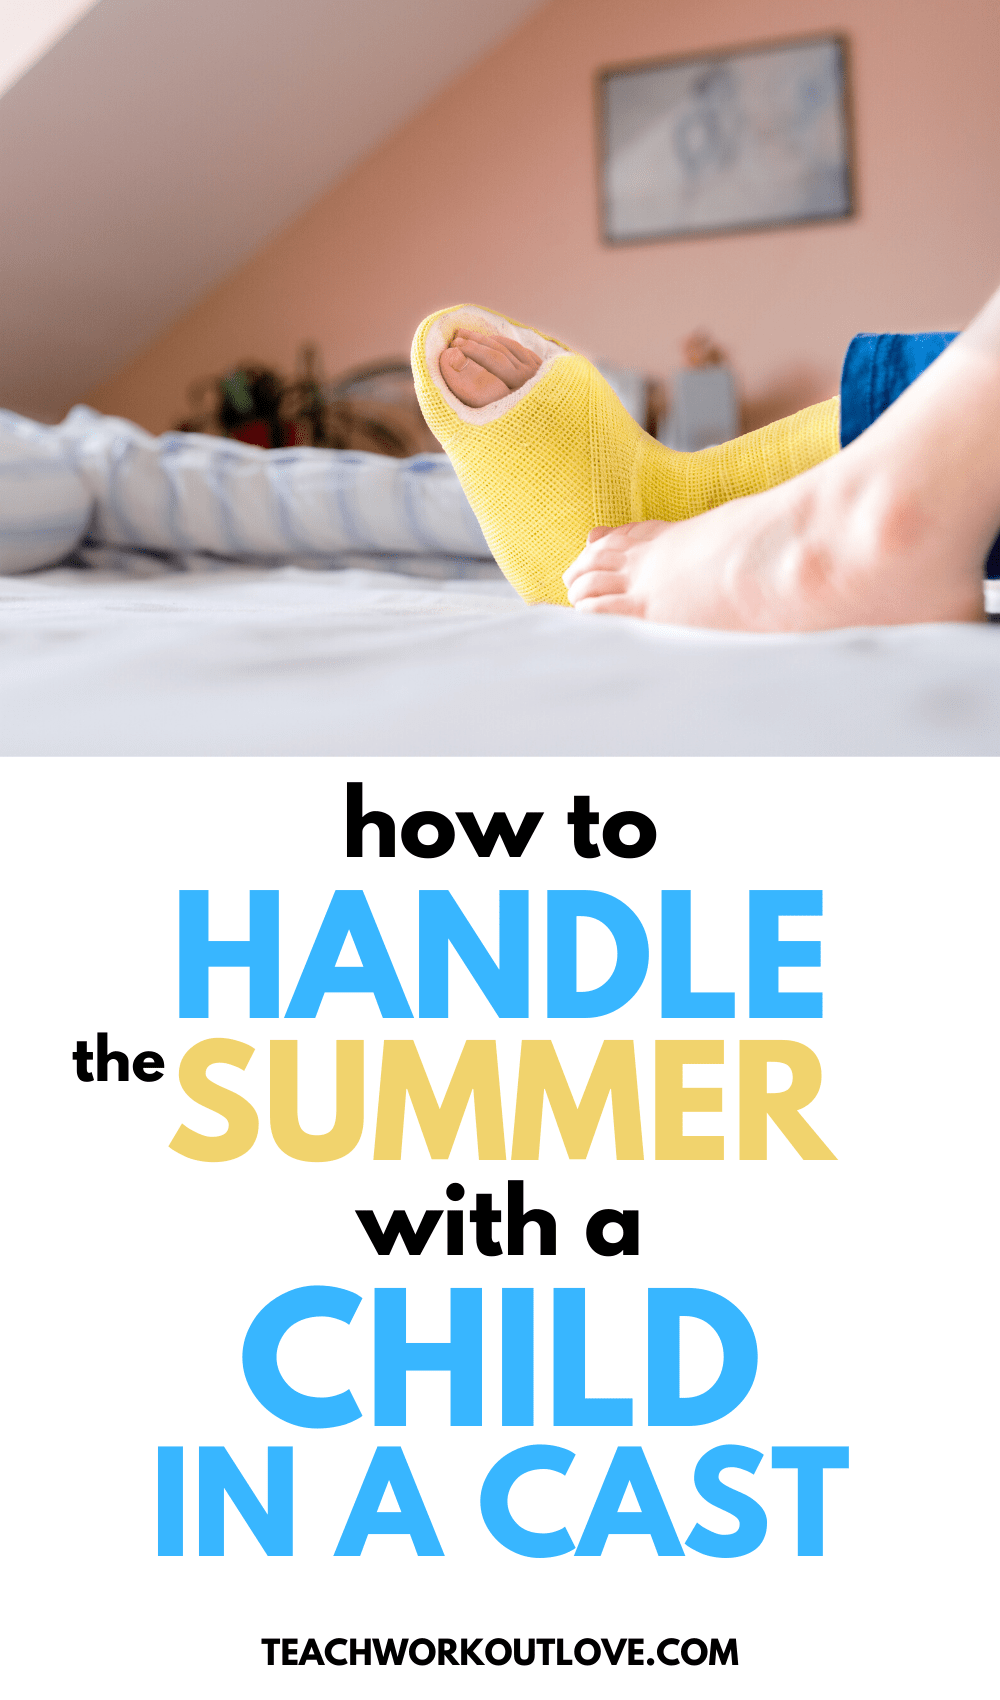 Summer is here and your child needs to wear a cast all summer. What do you do now? Here's how to handle the summer with a child in a cast.